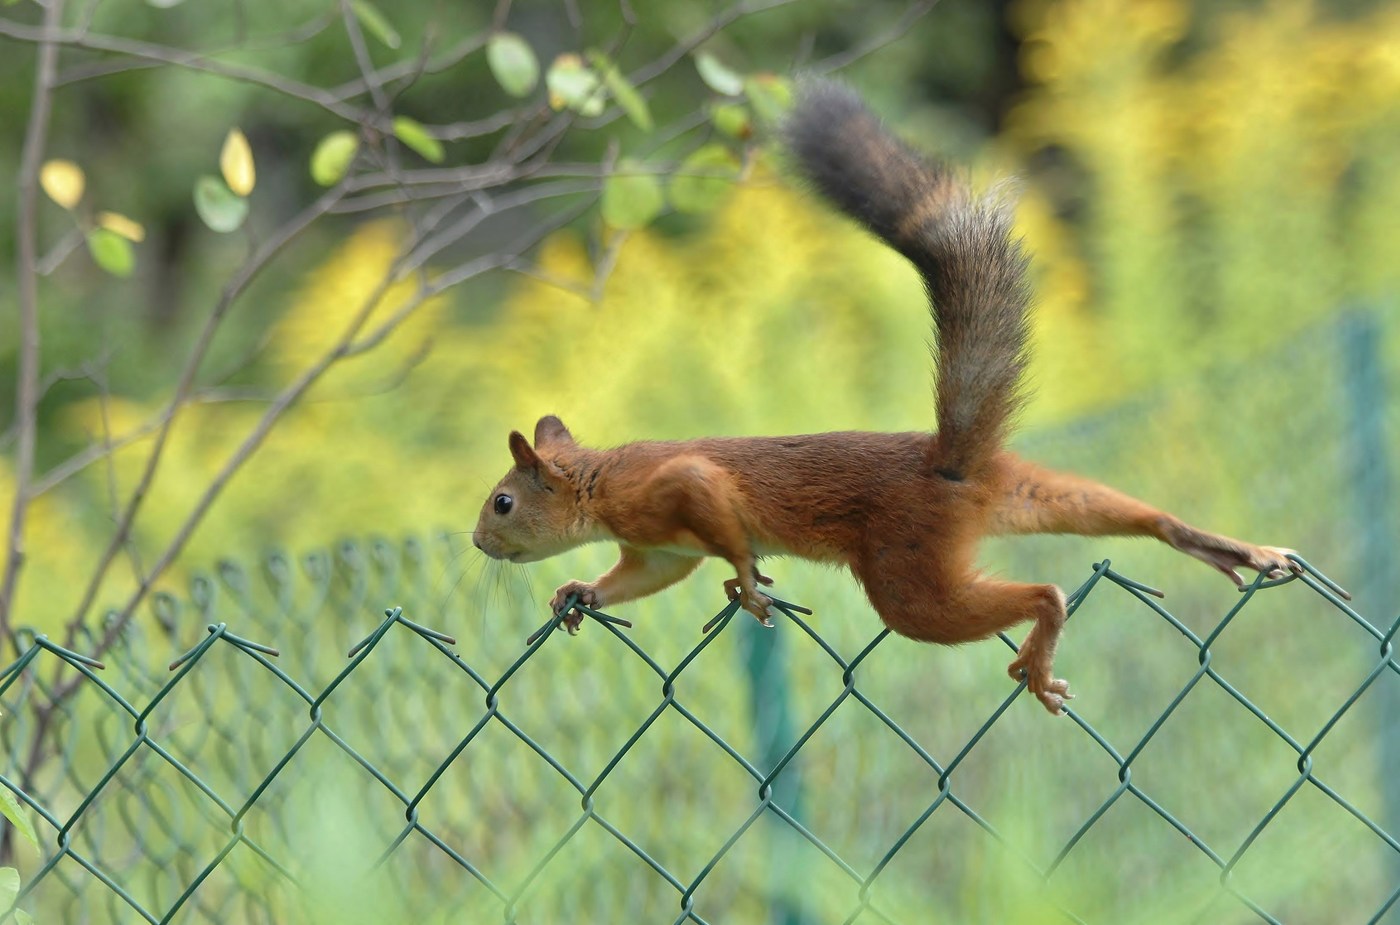 Squirrel deftly moves on the iron grid